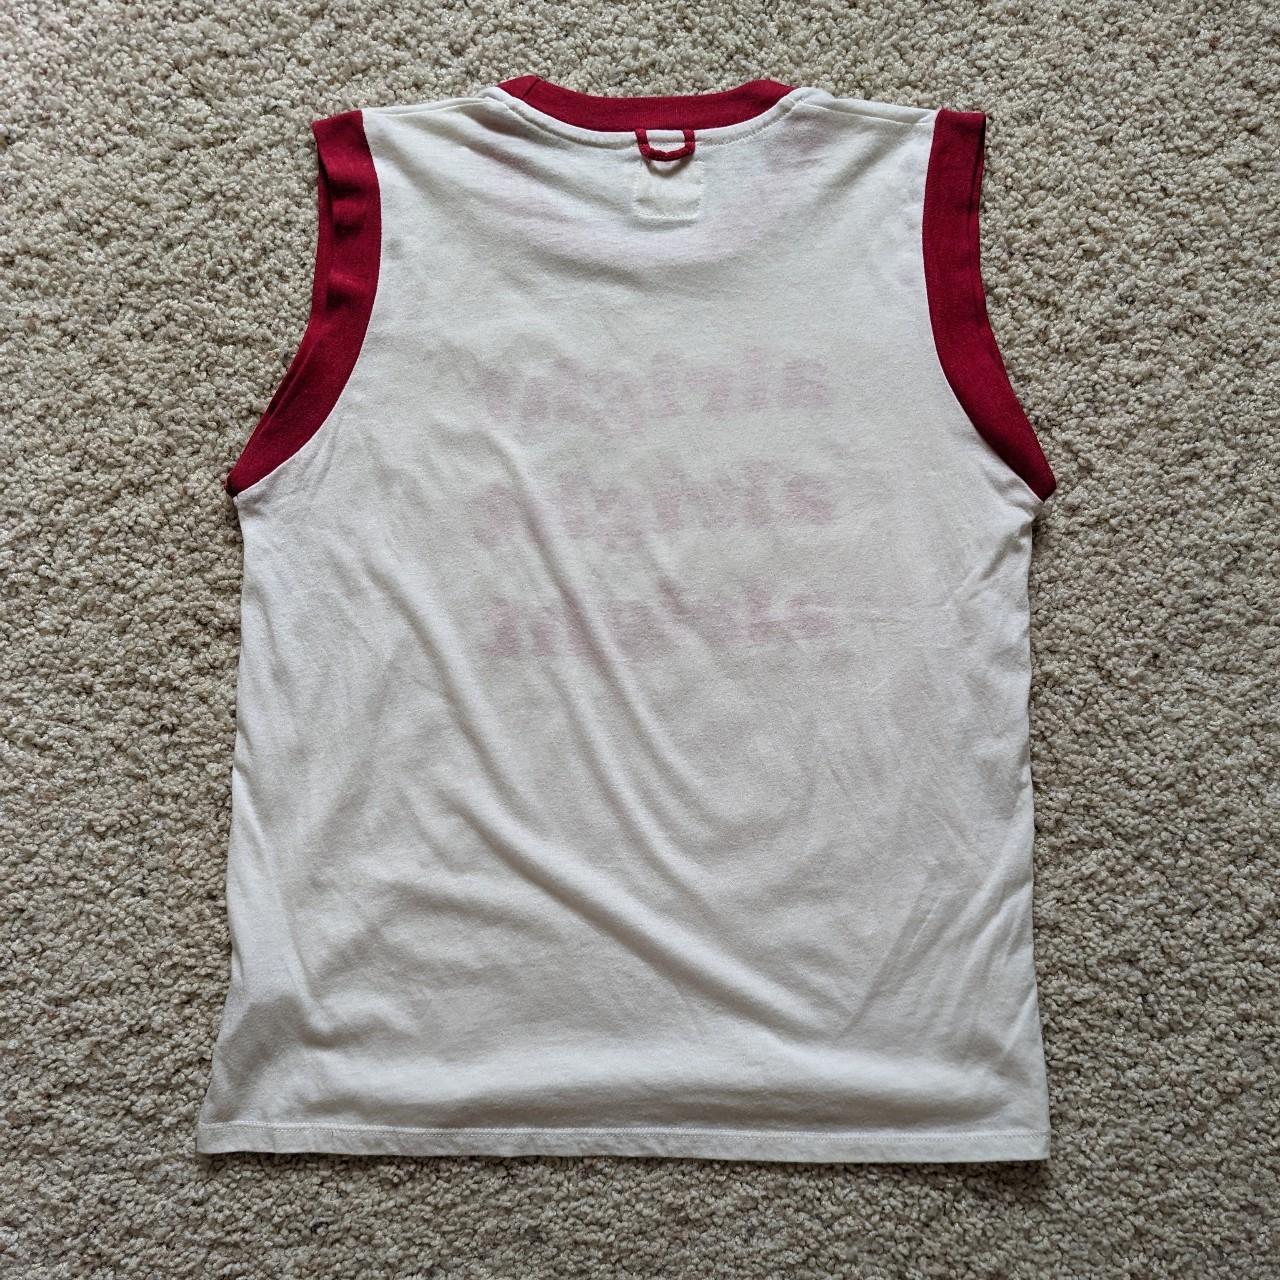 Camp Collection Women's White and Red Vest (2)